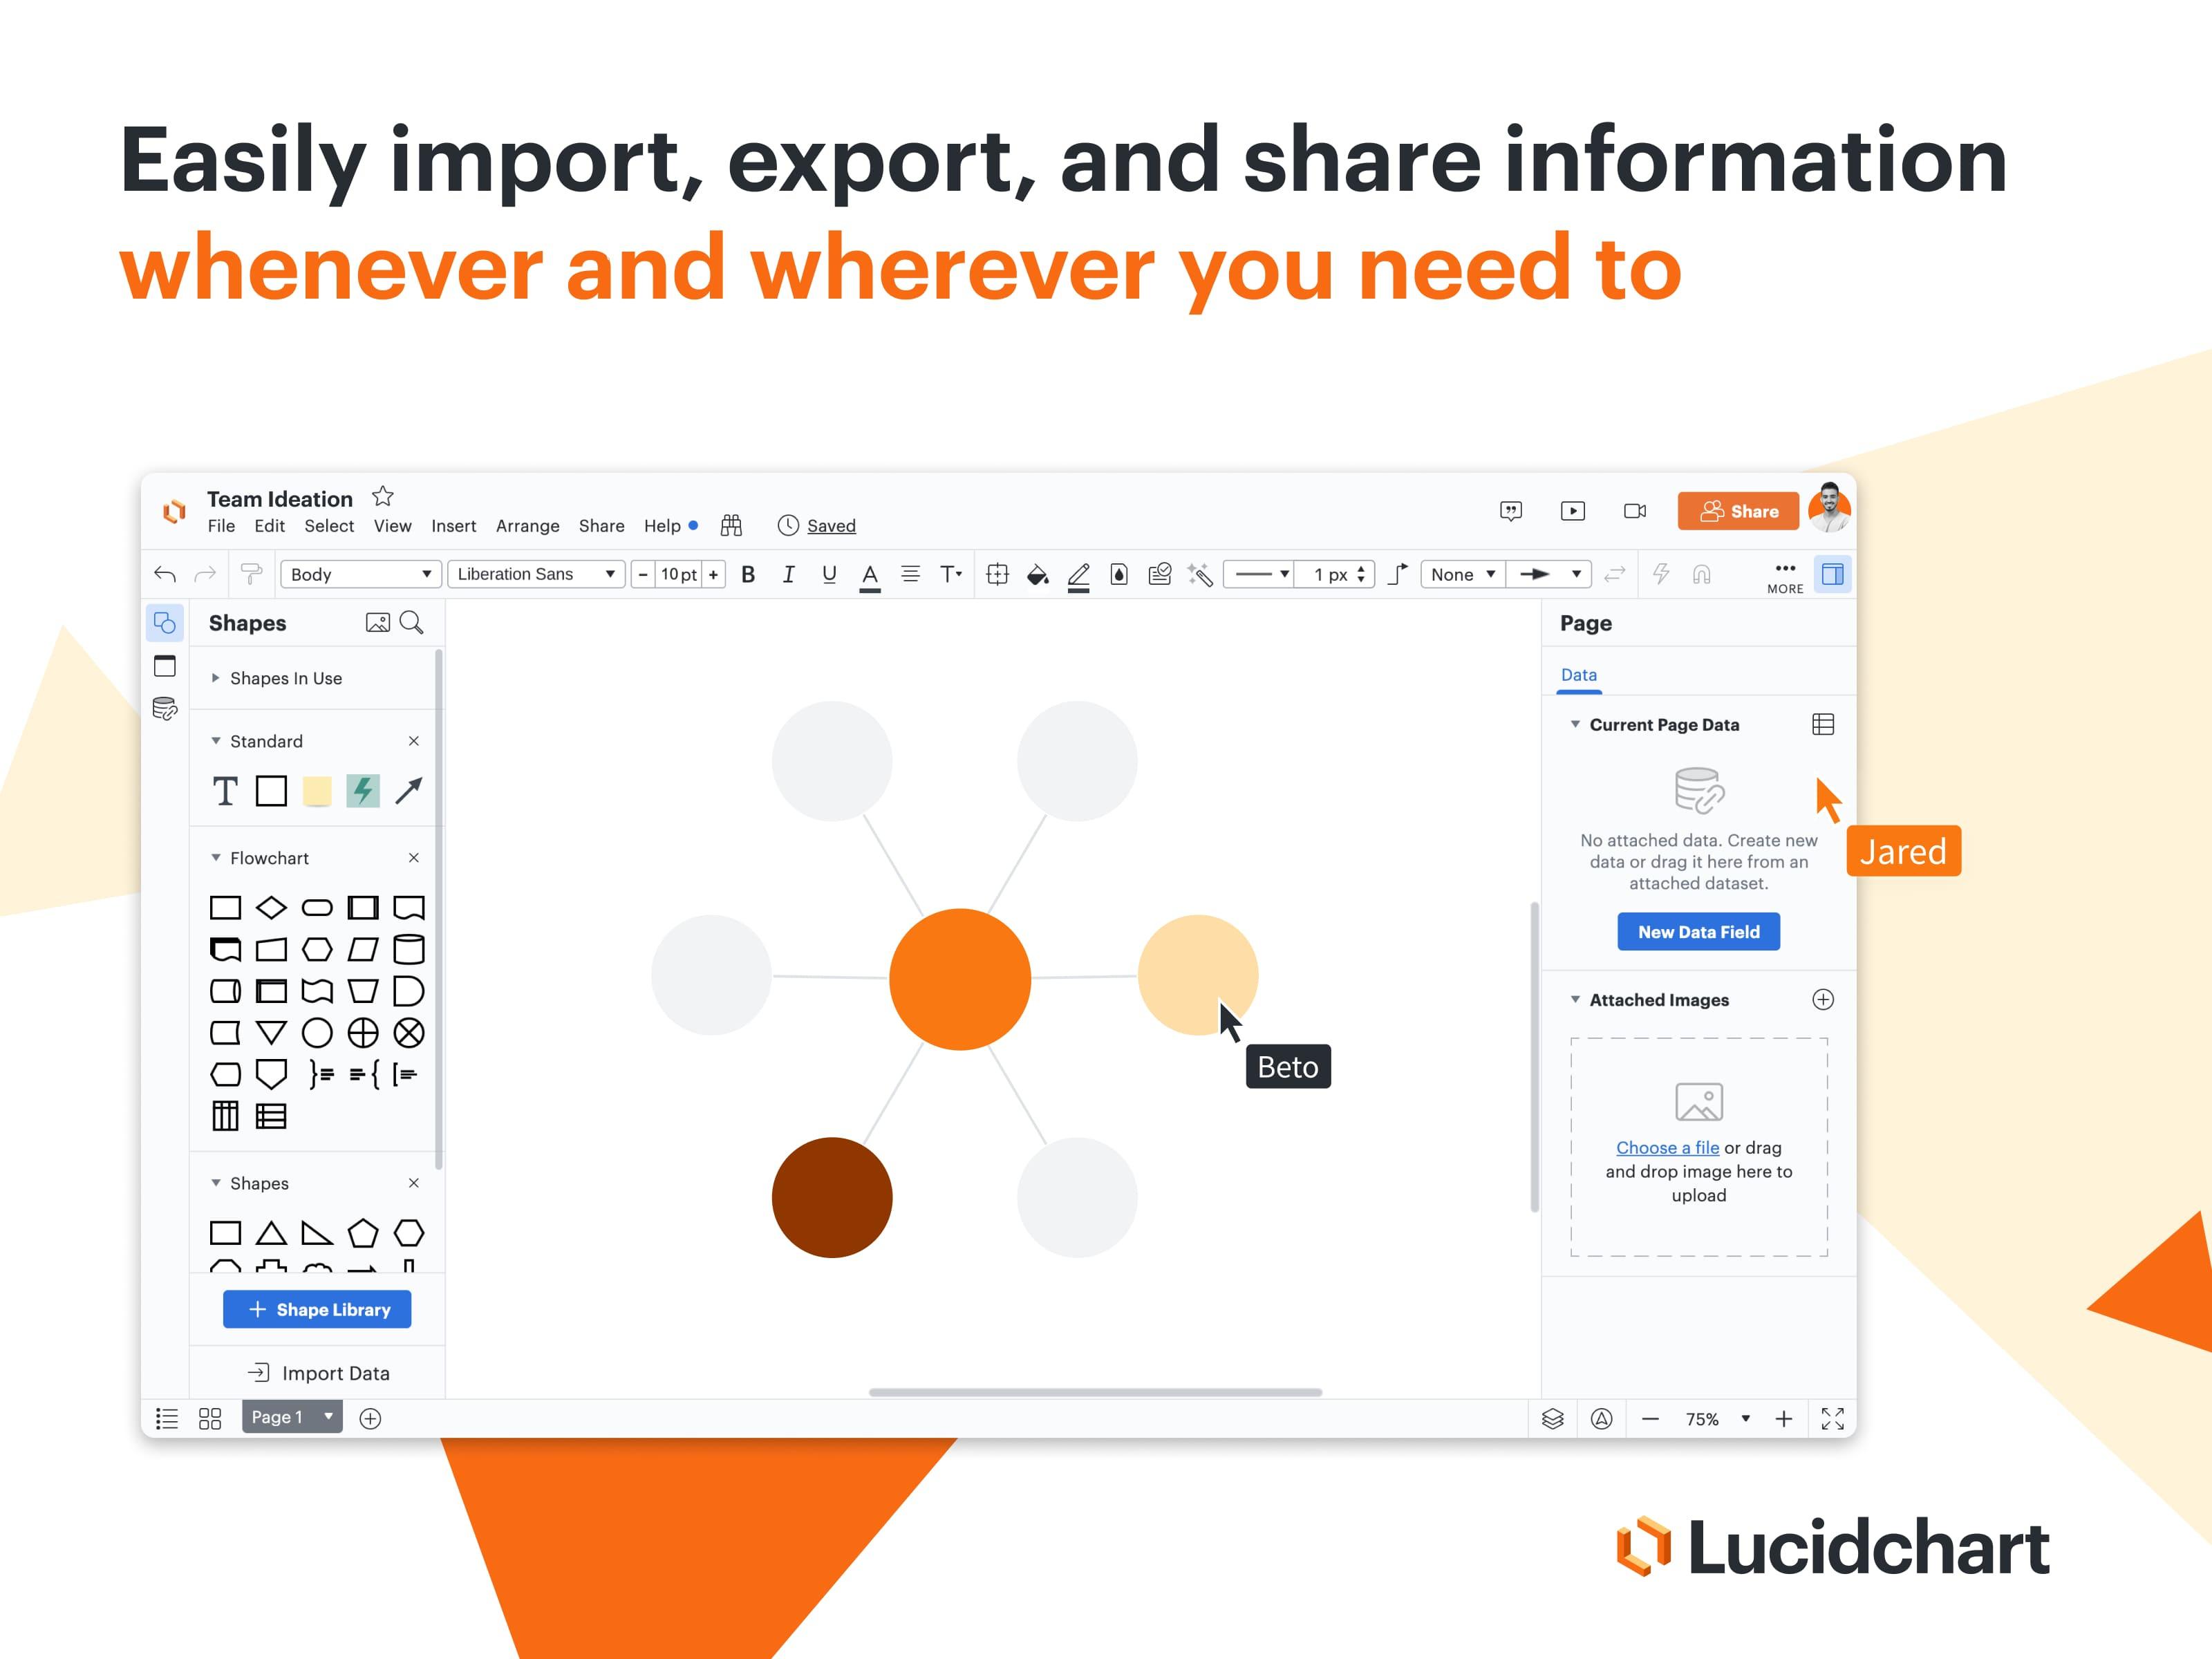 Lucidchart - Import, export and share information easily at all times, online